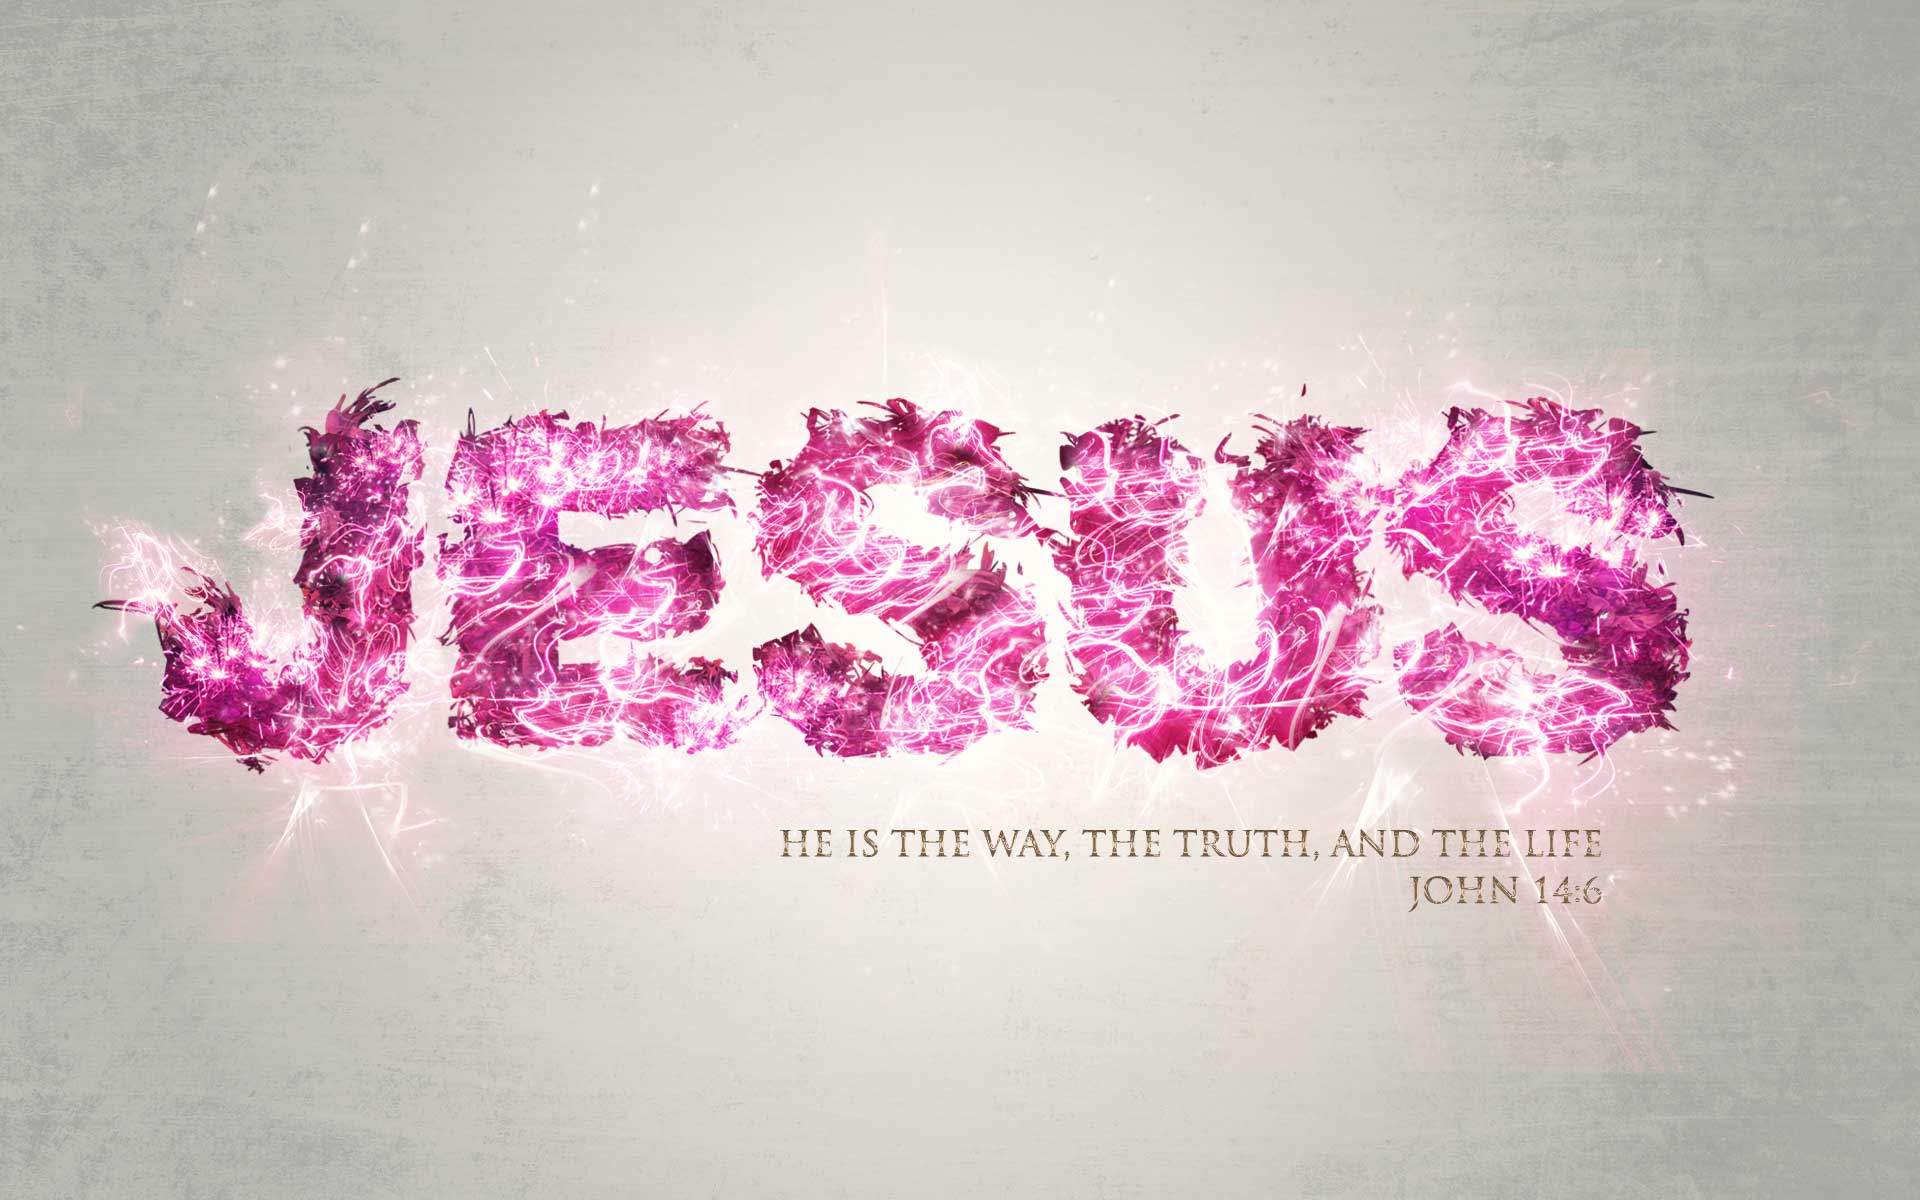 Jesus,the way,the truth,and the life - John 14:6 by mostpato